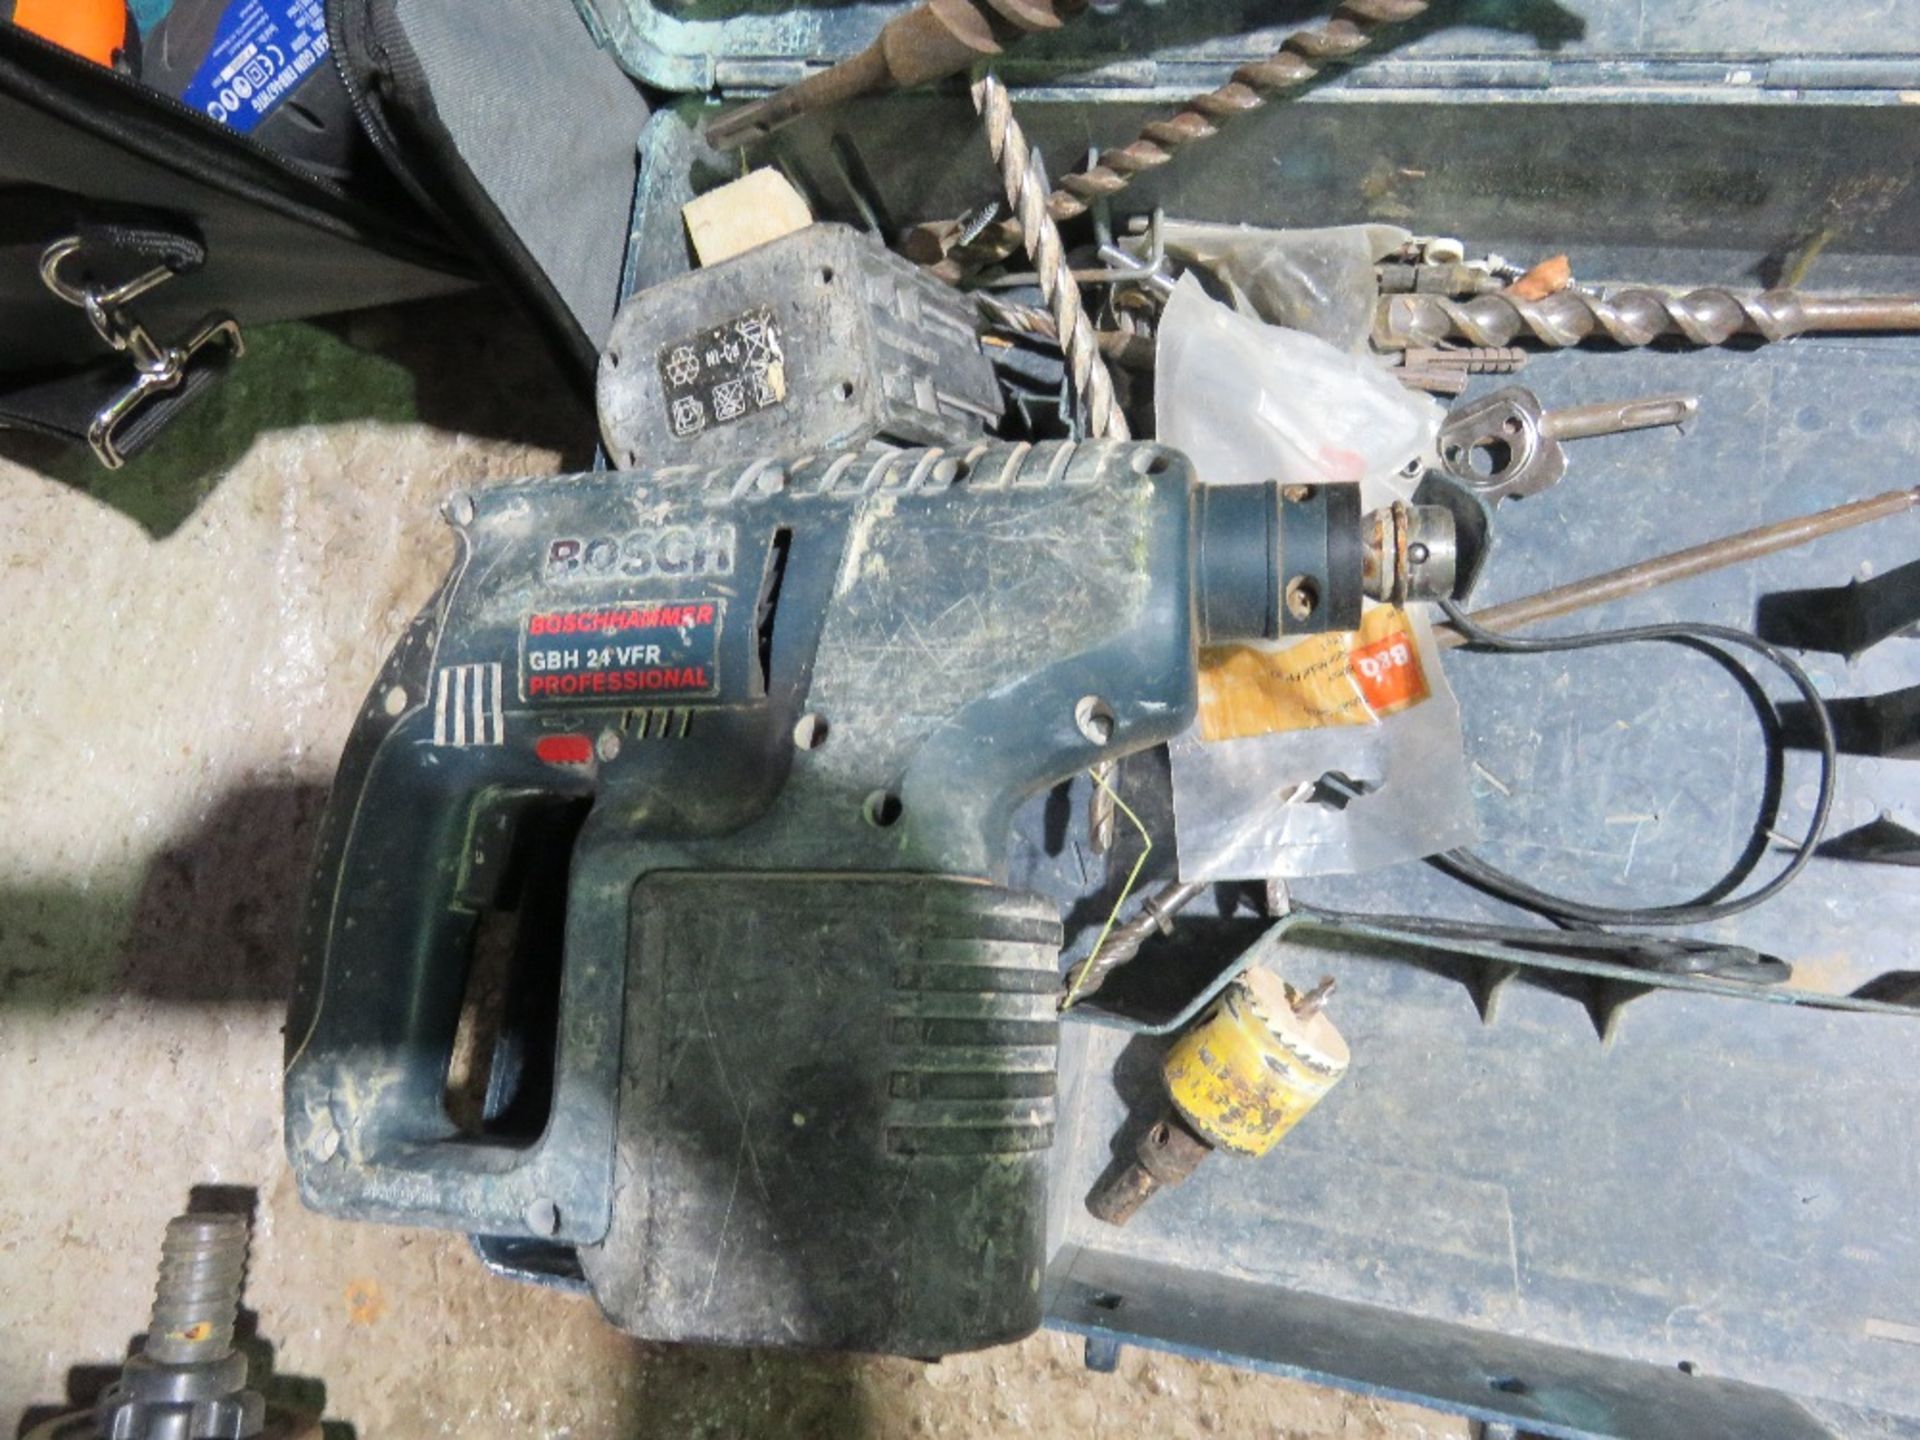 BOSCH HEAVY DUTY BATTERY DRILL. THIS LOT IS SOLD UNDER THE AUCTIONEERS MARGIN SCHEME, THEREFORE N - Image 2 of 2